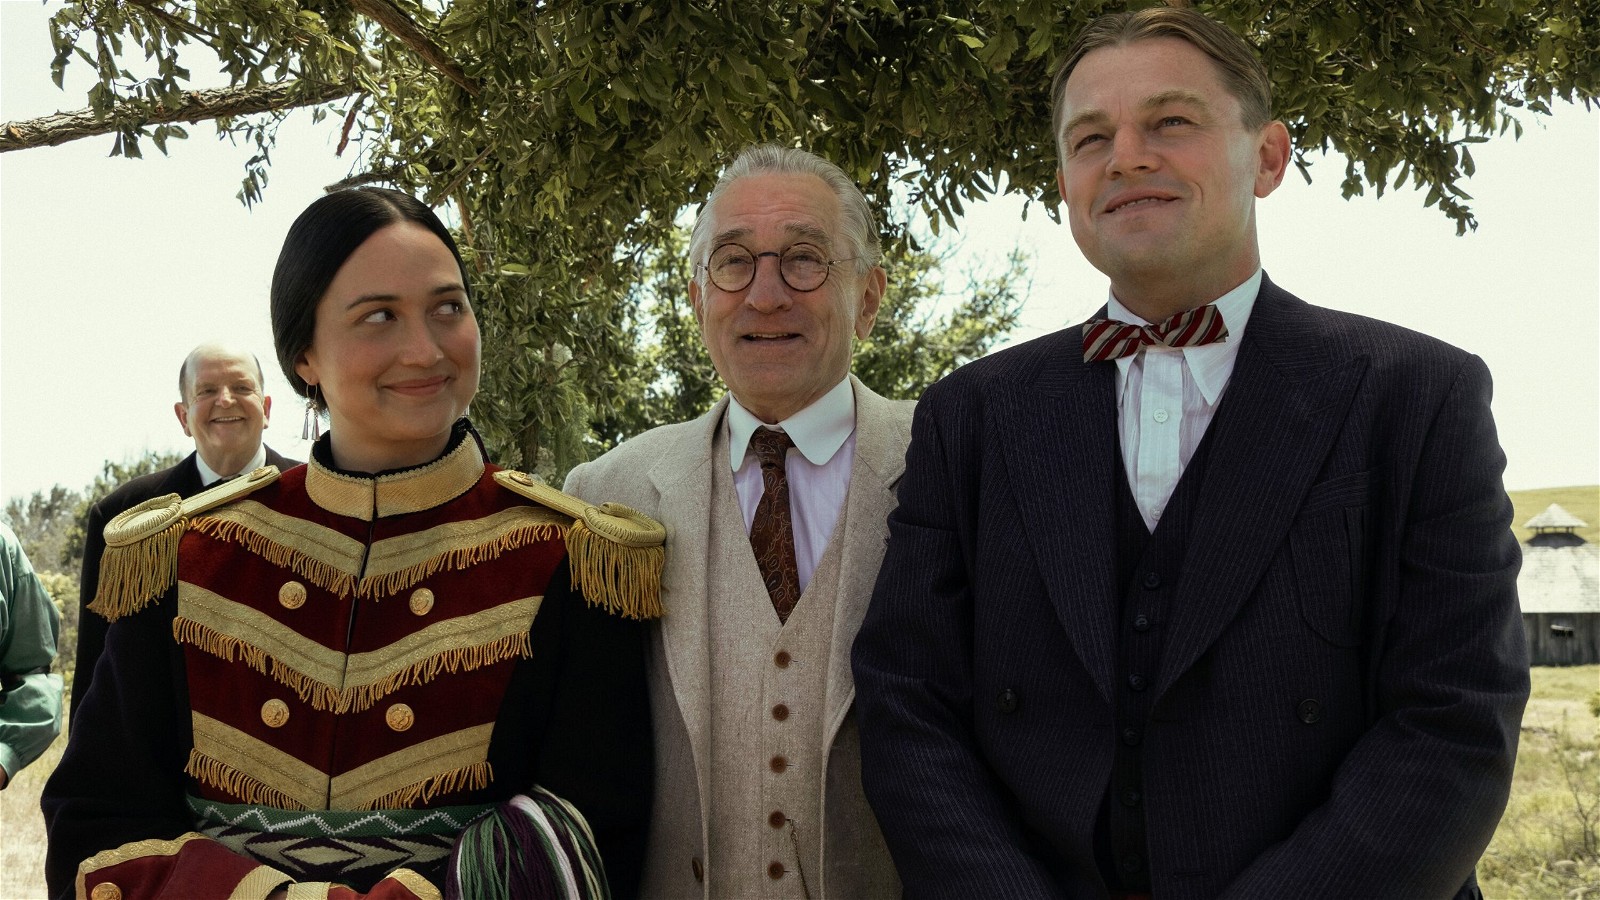 Lily Gladstone as Molly Burkhart, Robert De Niro as William King Hale, and Leonardo DiCaprio as Ernest Burkhart in Killers of the Flower Moon